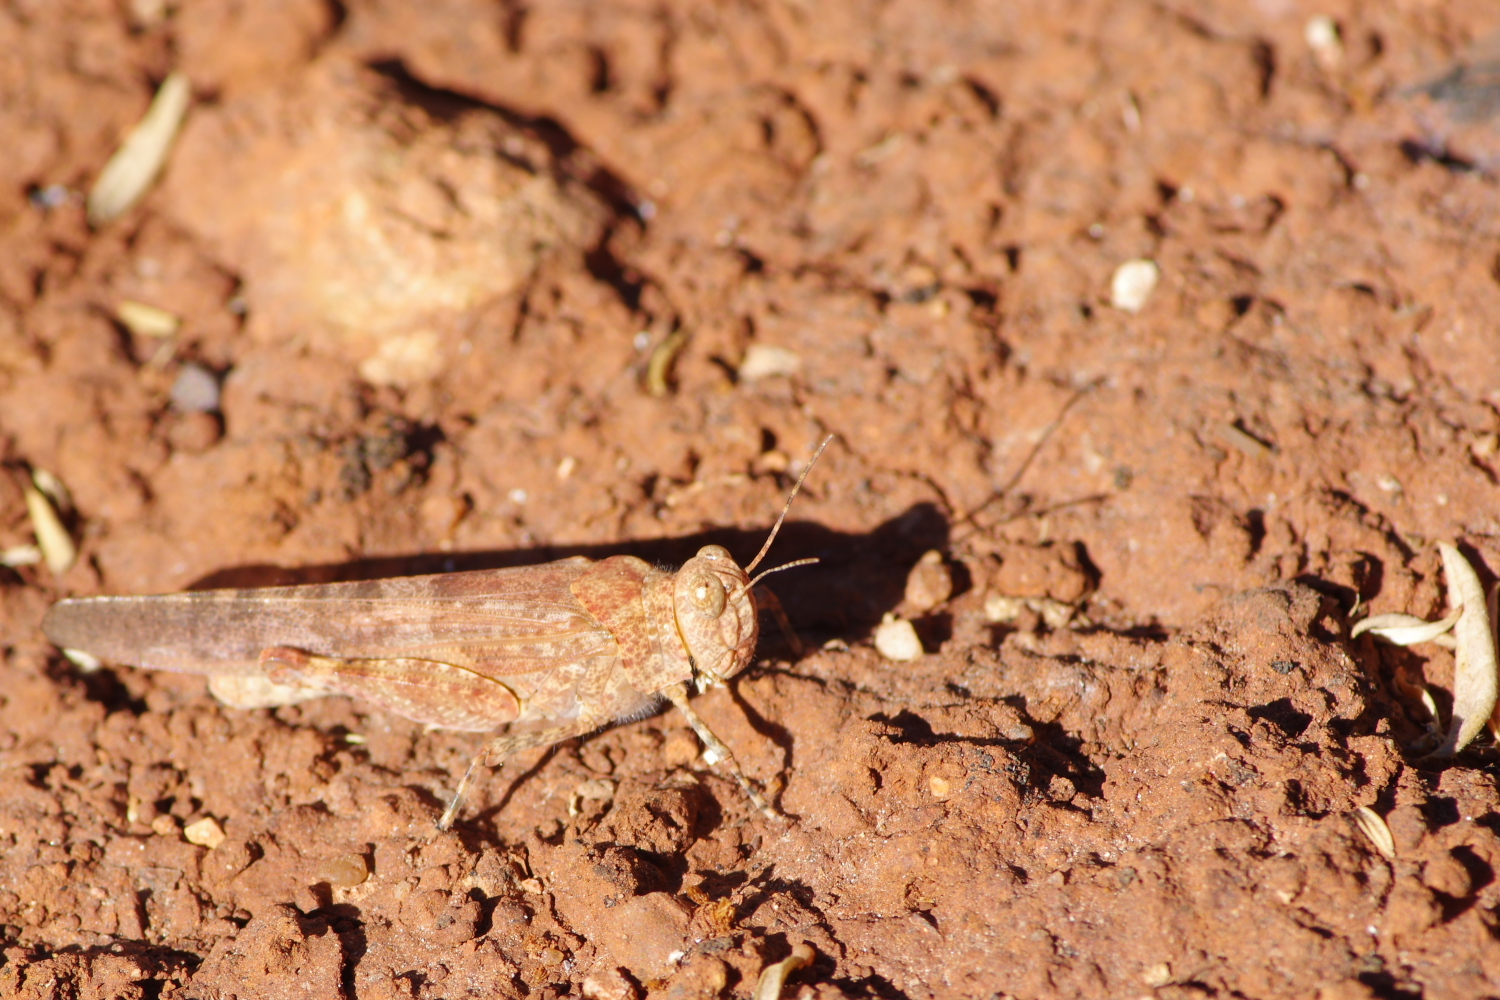 Grasshopper on the ground, blending in with the dirt